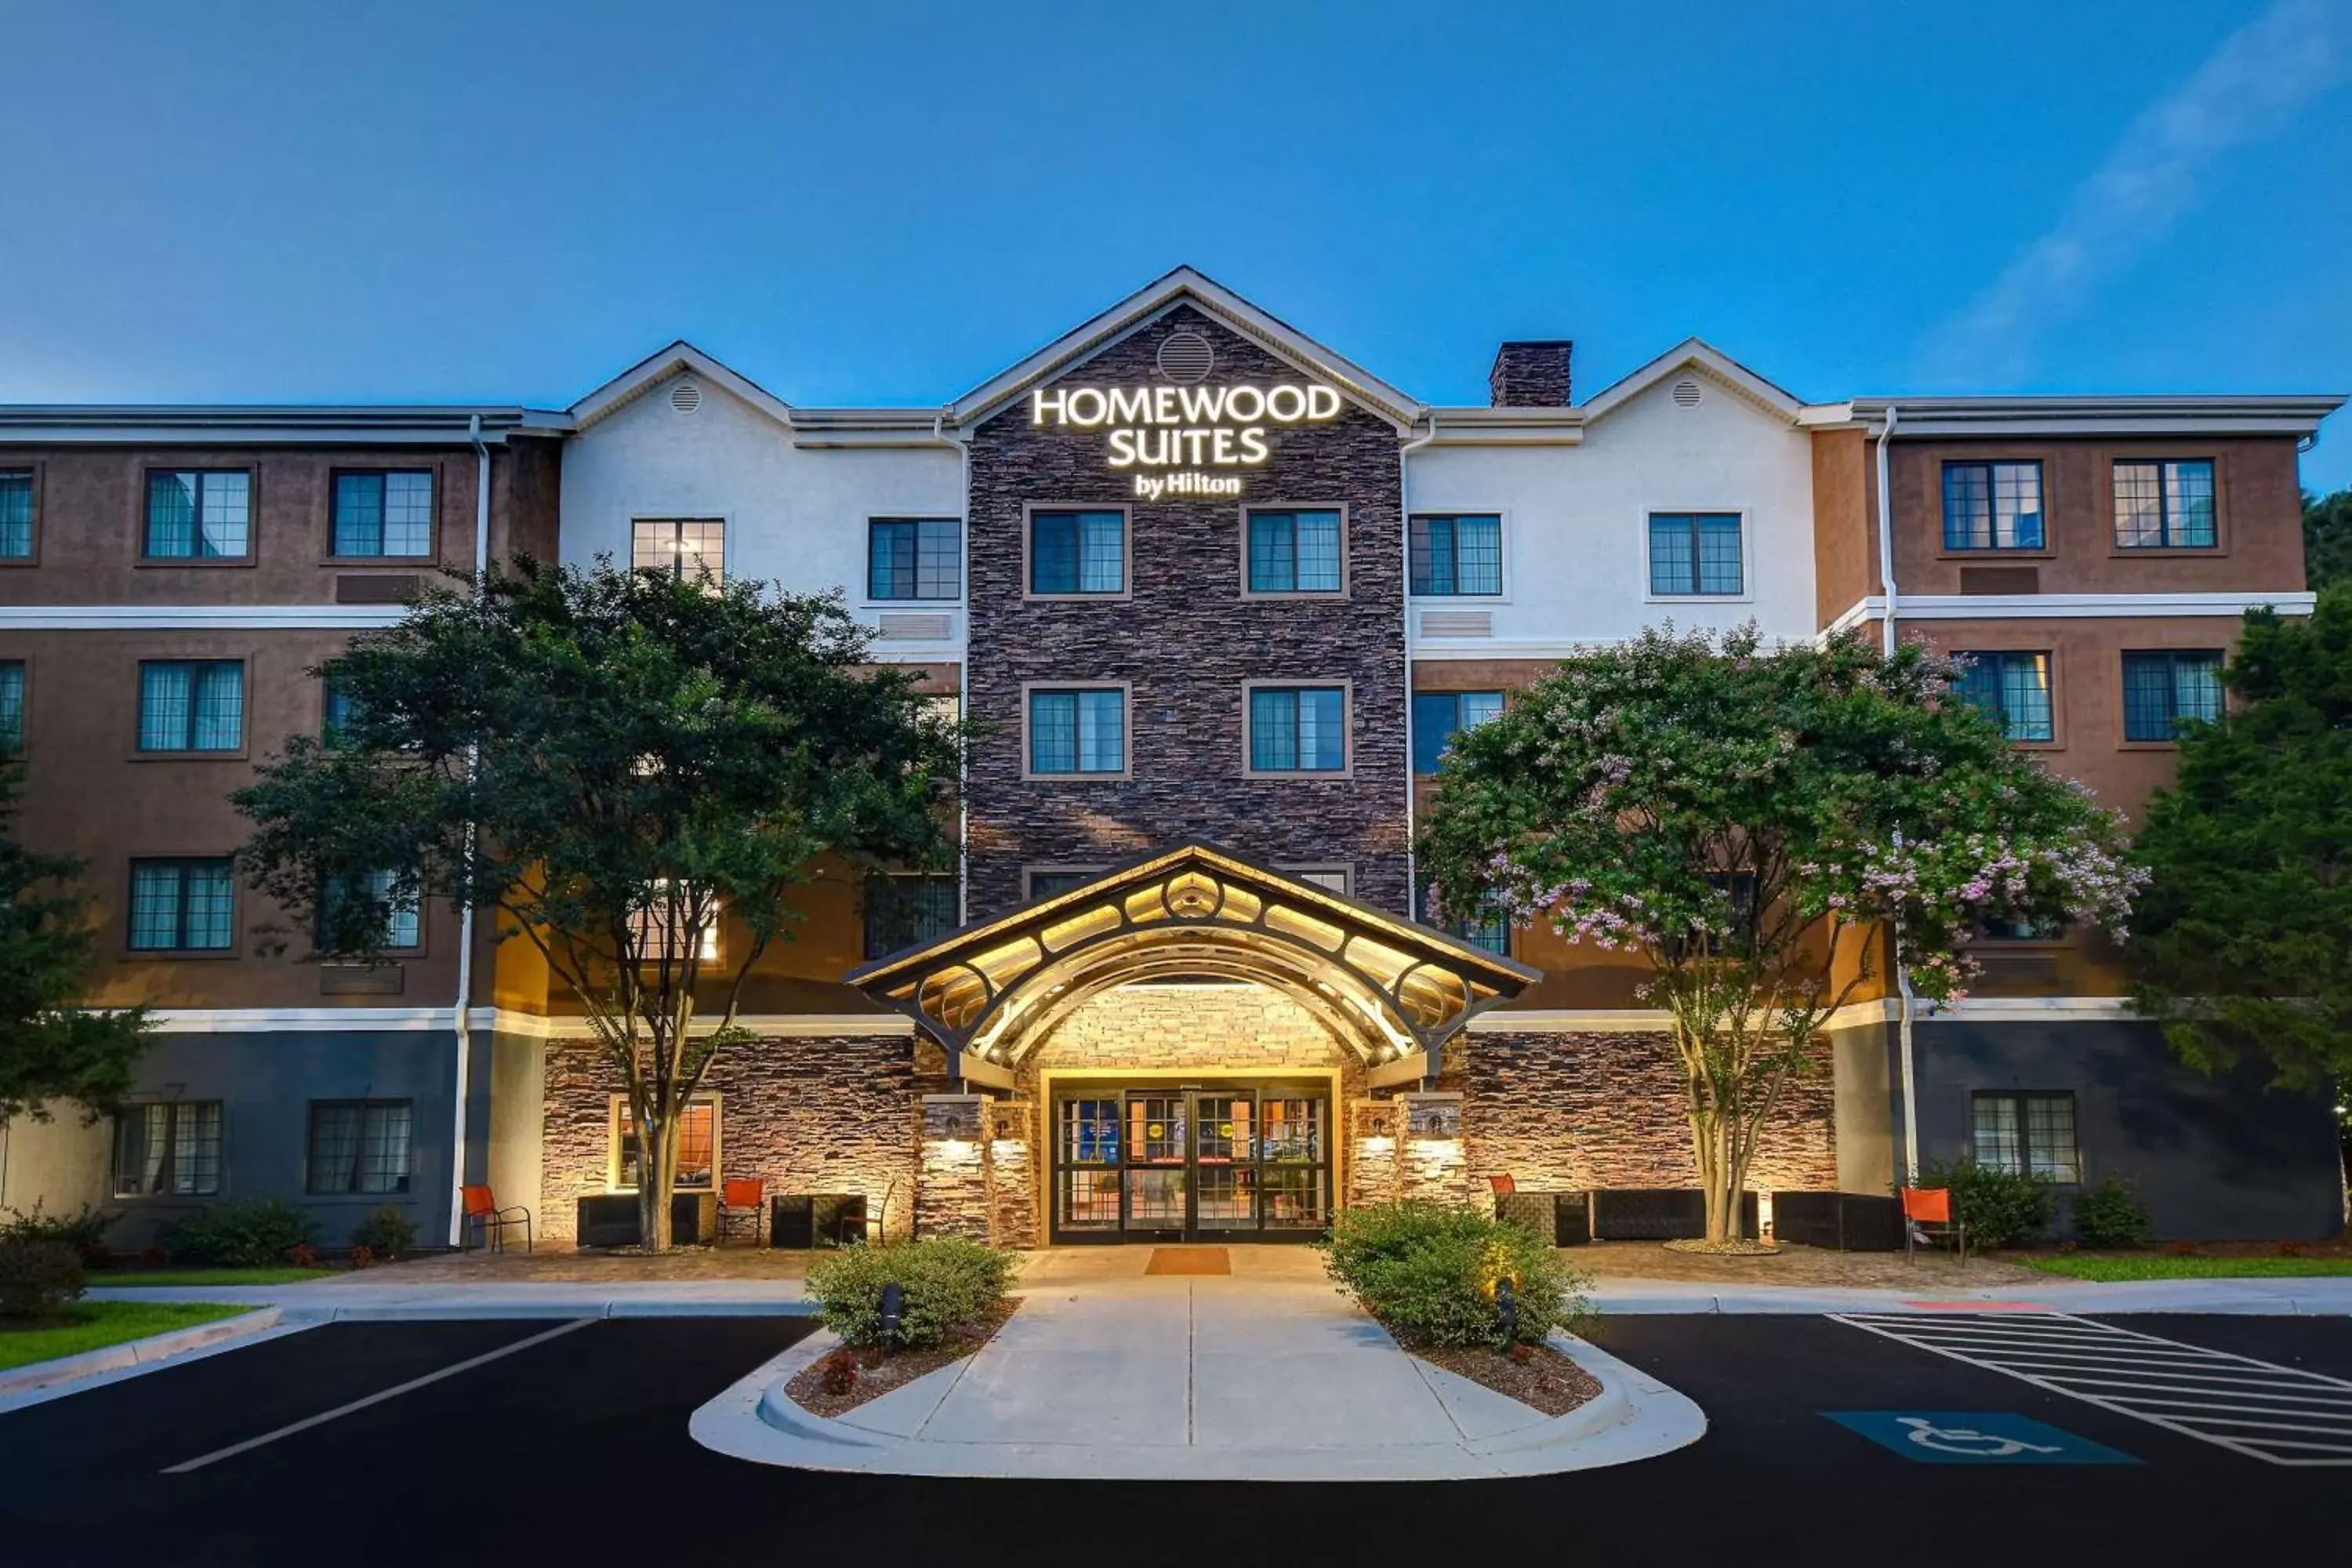 Property Building in Homewood Suites Newport News - Yorktown by Hilton